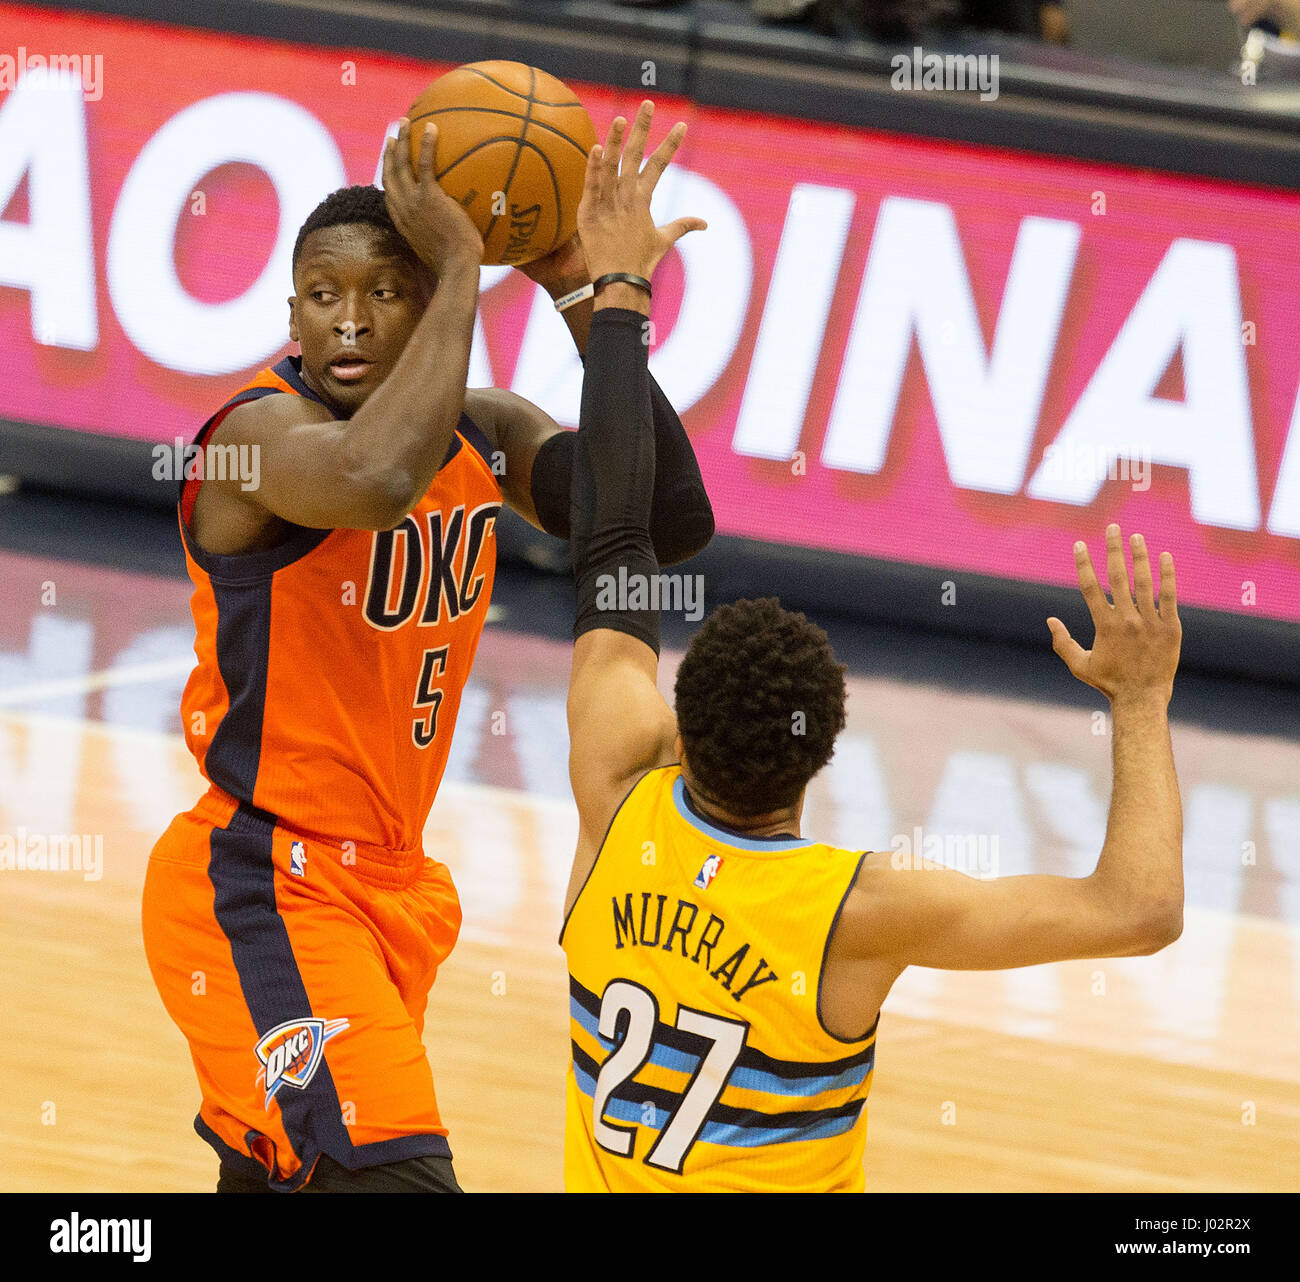 Denver, Colorado, USA. 9th Apr, 2017. Thunder's VICTOR OLADIPO, left, looks to pass the ball off with Nuggets JAMAL MURRAY, right, during the 1st. Half at the Pepsi Center Sunday afternoon. The Thunder beats the Nuggets 106-105. Credit: Hector Acevedo/ZUMA Wire/Alamy Live News Stock Photo